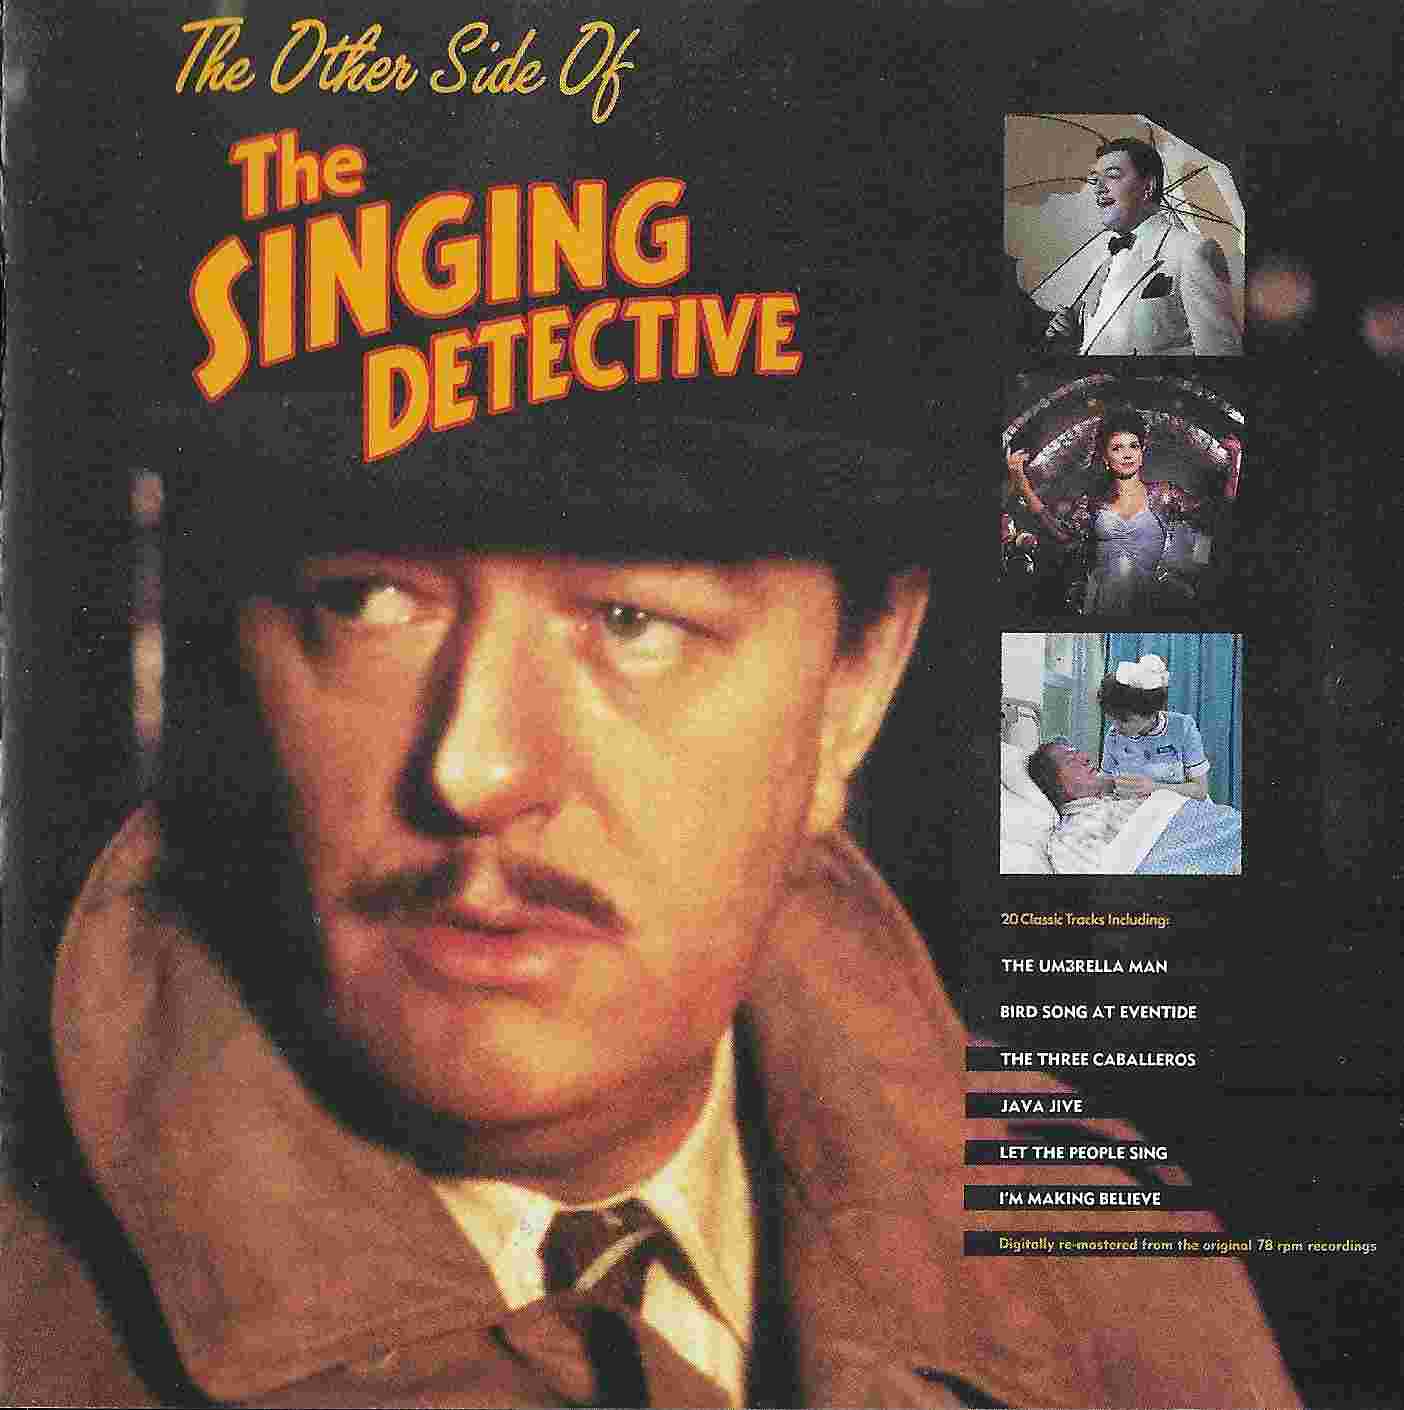 Picture of The other side of the singing detective by artist Various from the BBC cds - Records and Tapes library